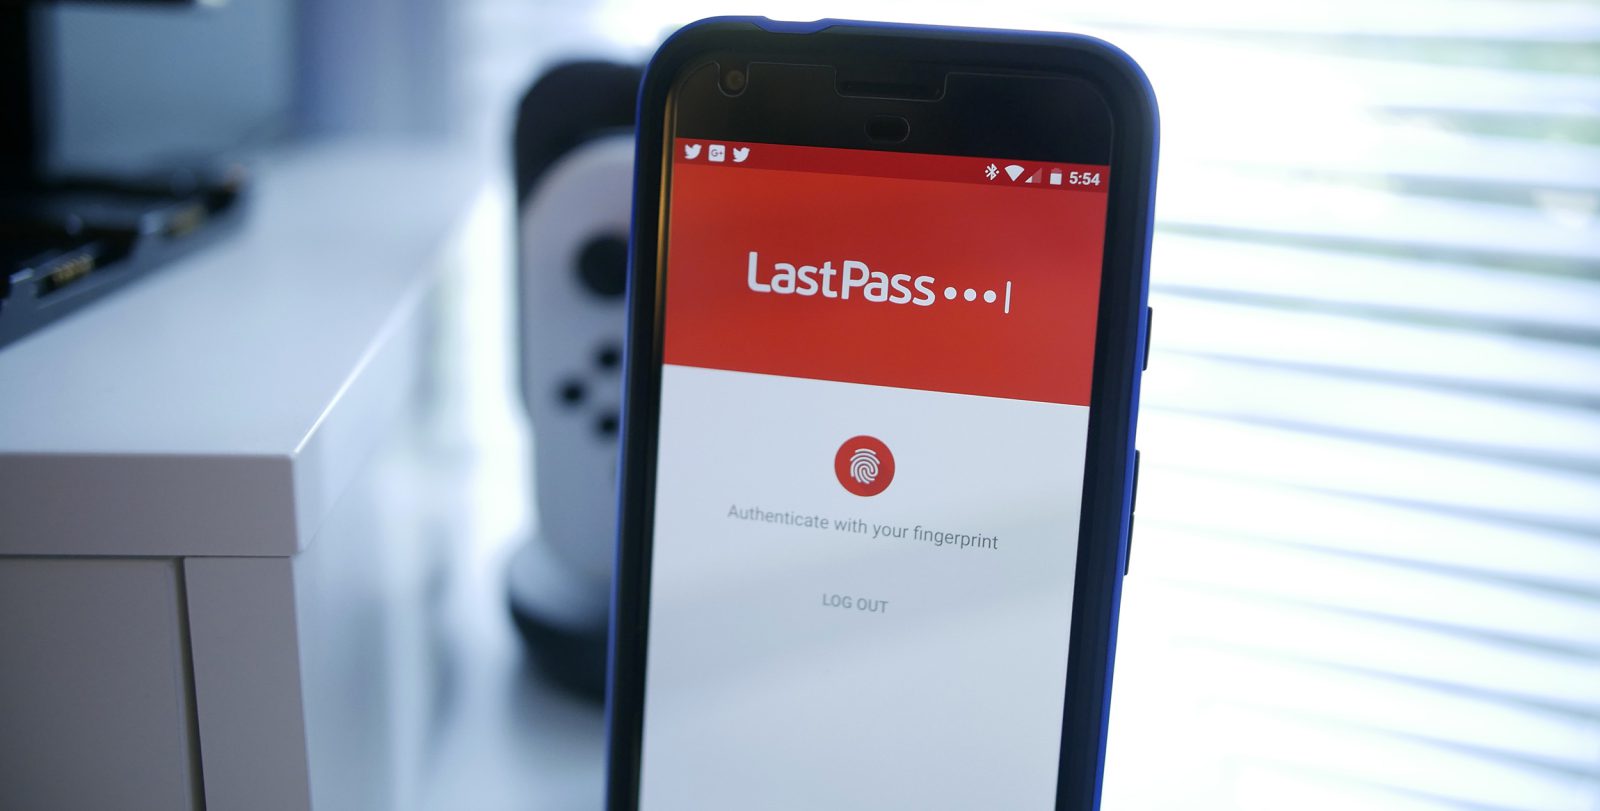 lastpass share with family